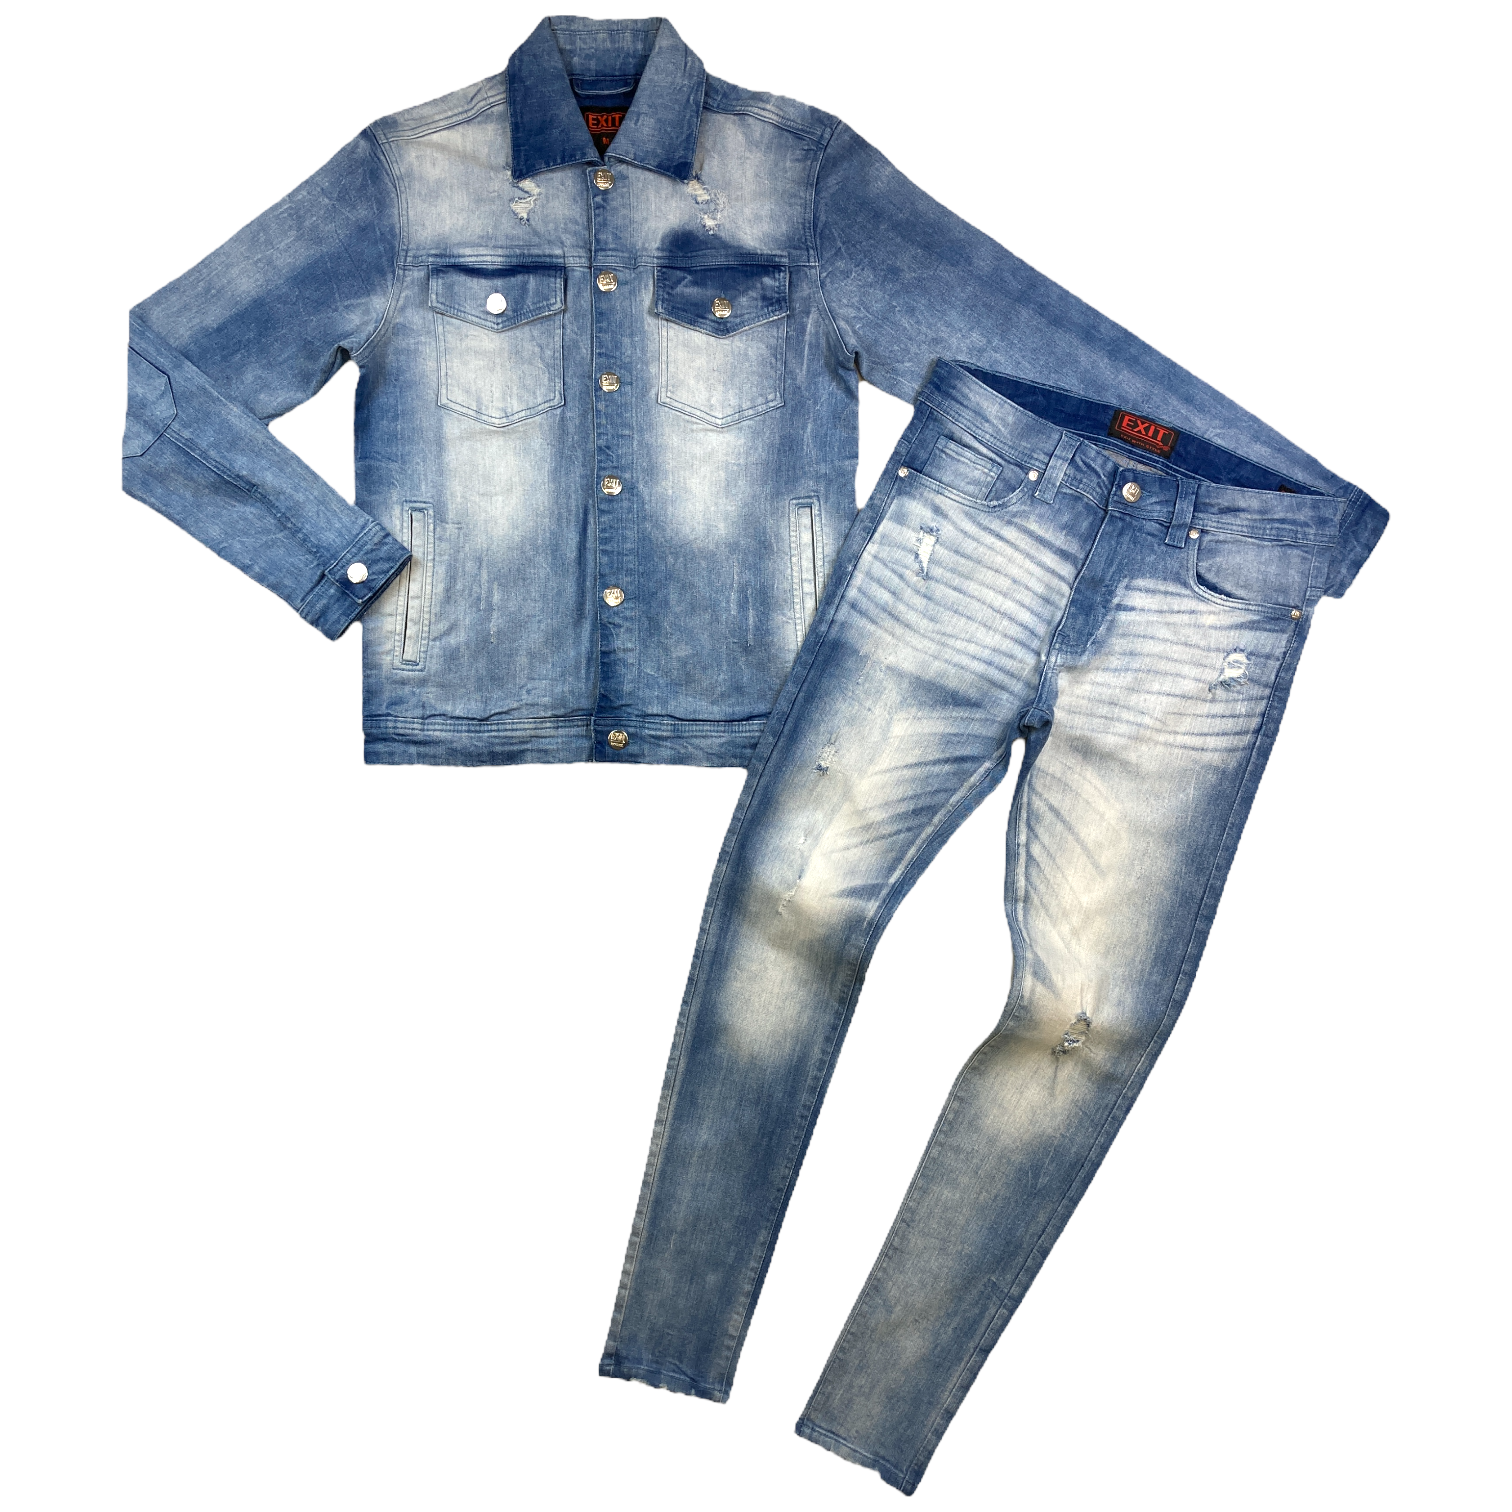 Men's Denim Outfit Set (Dark Blue) | 1:6 Scale Male Outfit Sets | GISGT-020A